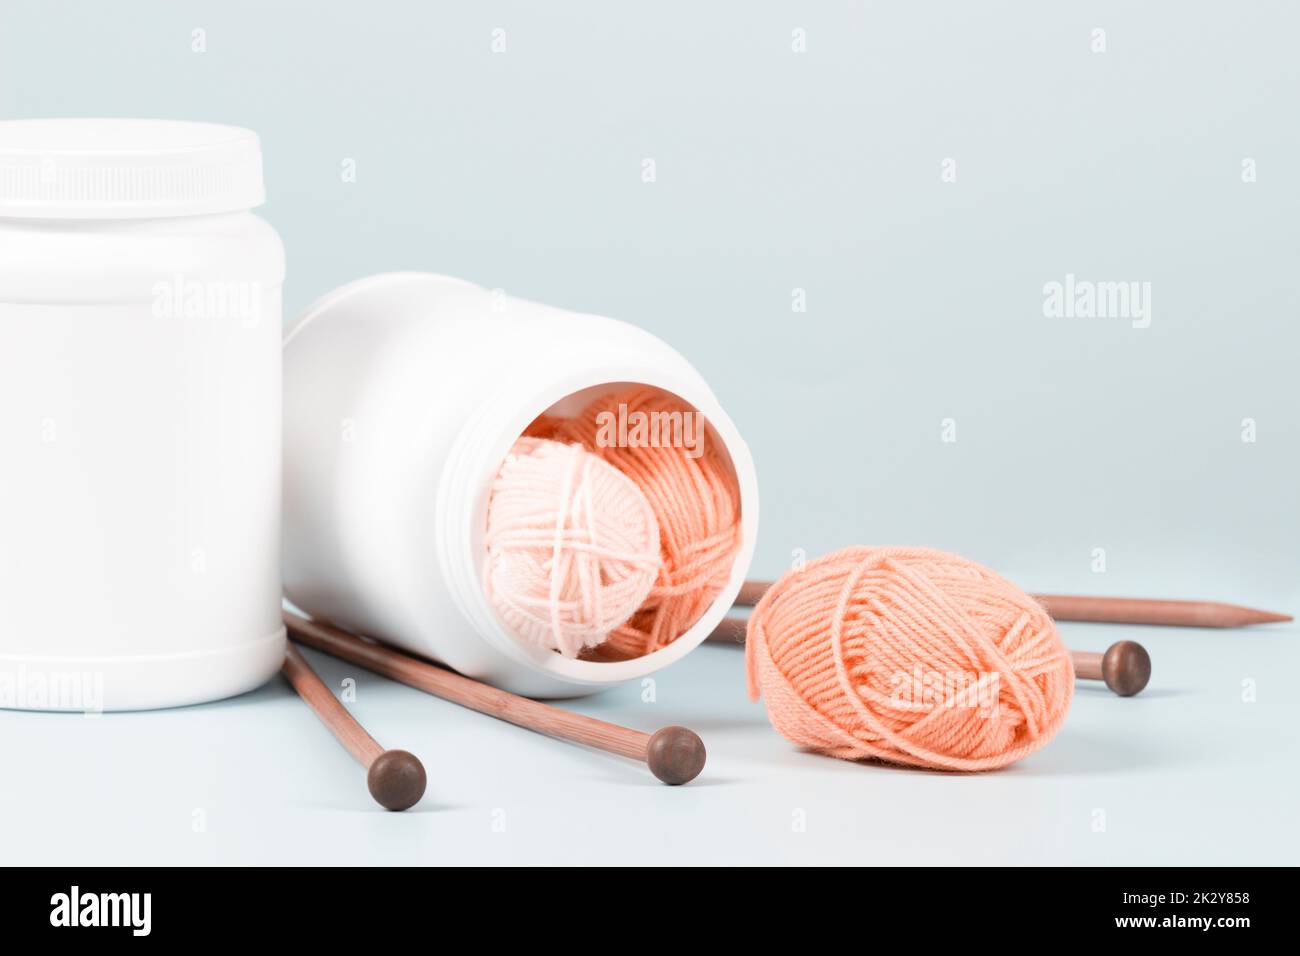 Knitting as therapy. Supplement bottle with balls of yarn and knitting needles on a light blue background. Knitting health benefits, stress reduction Stock Photo